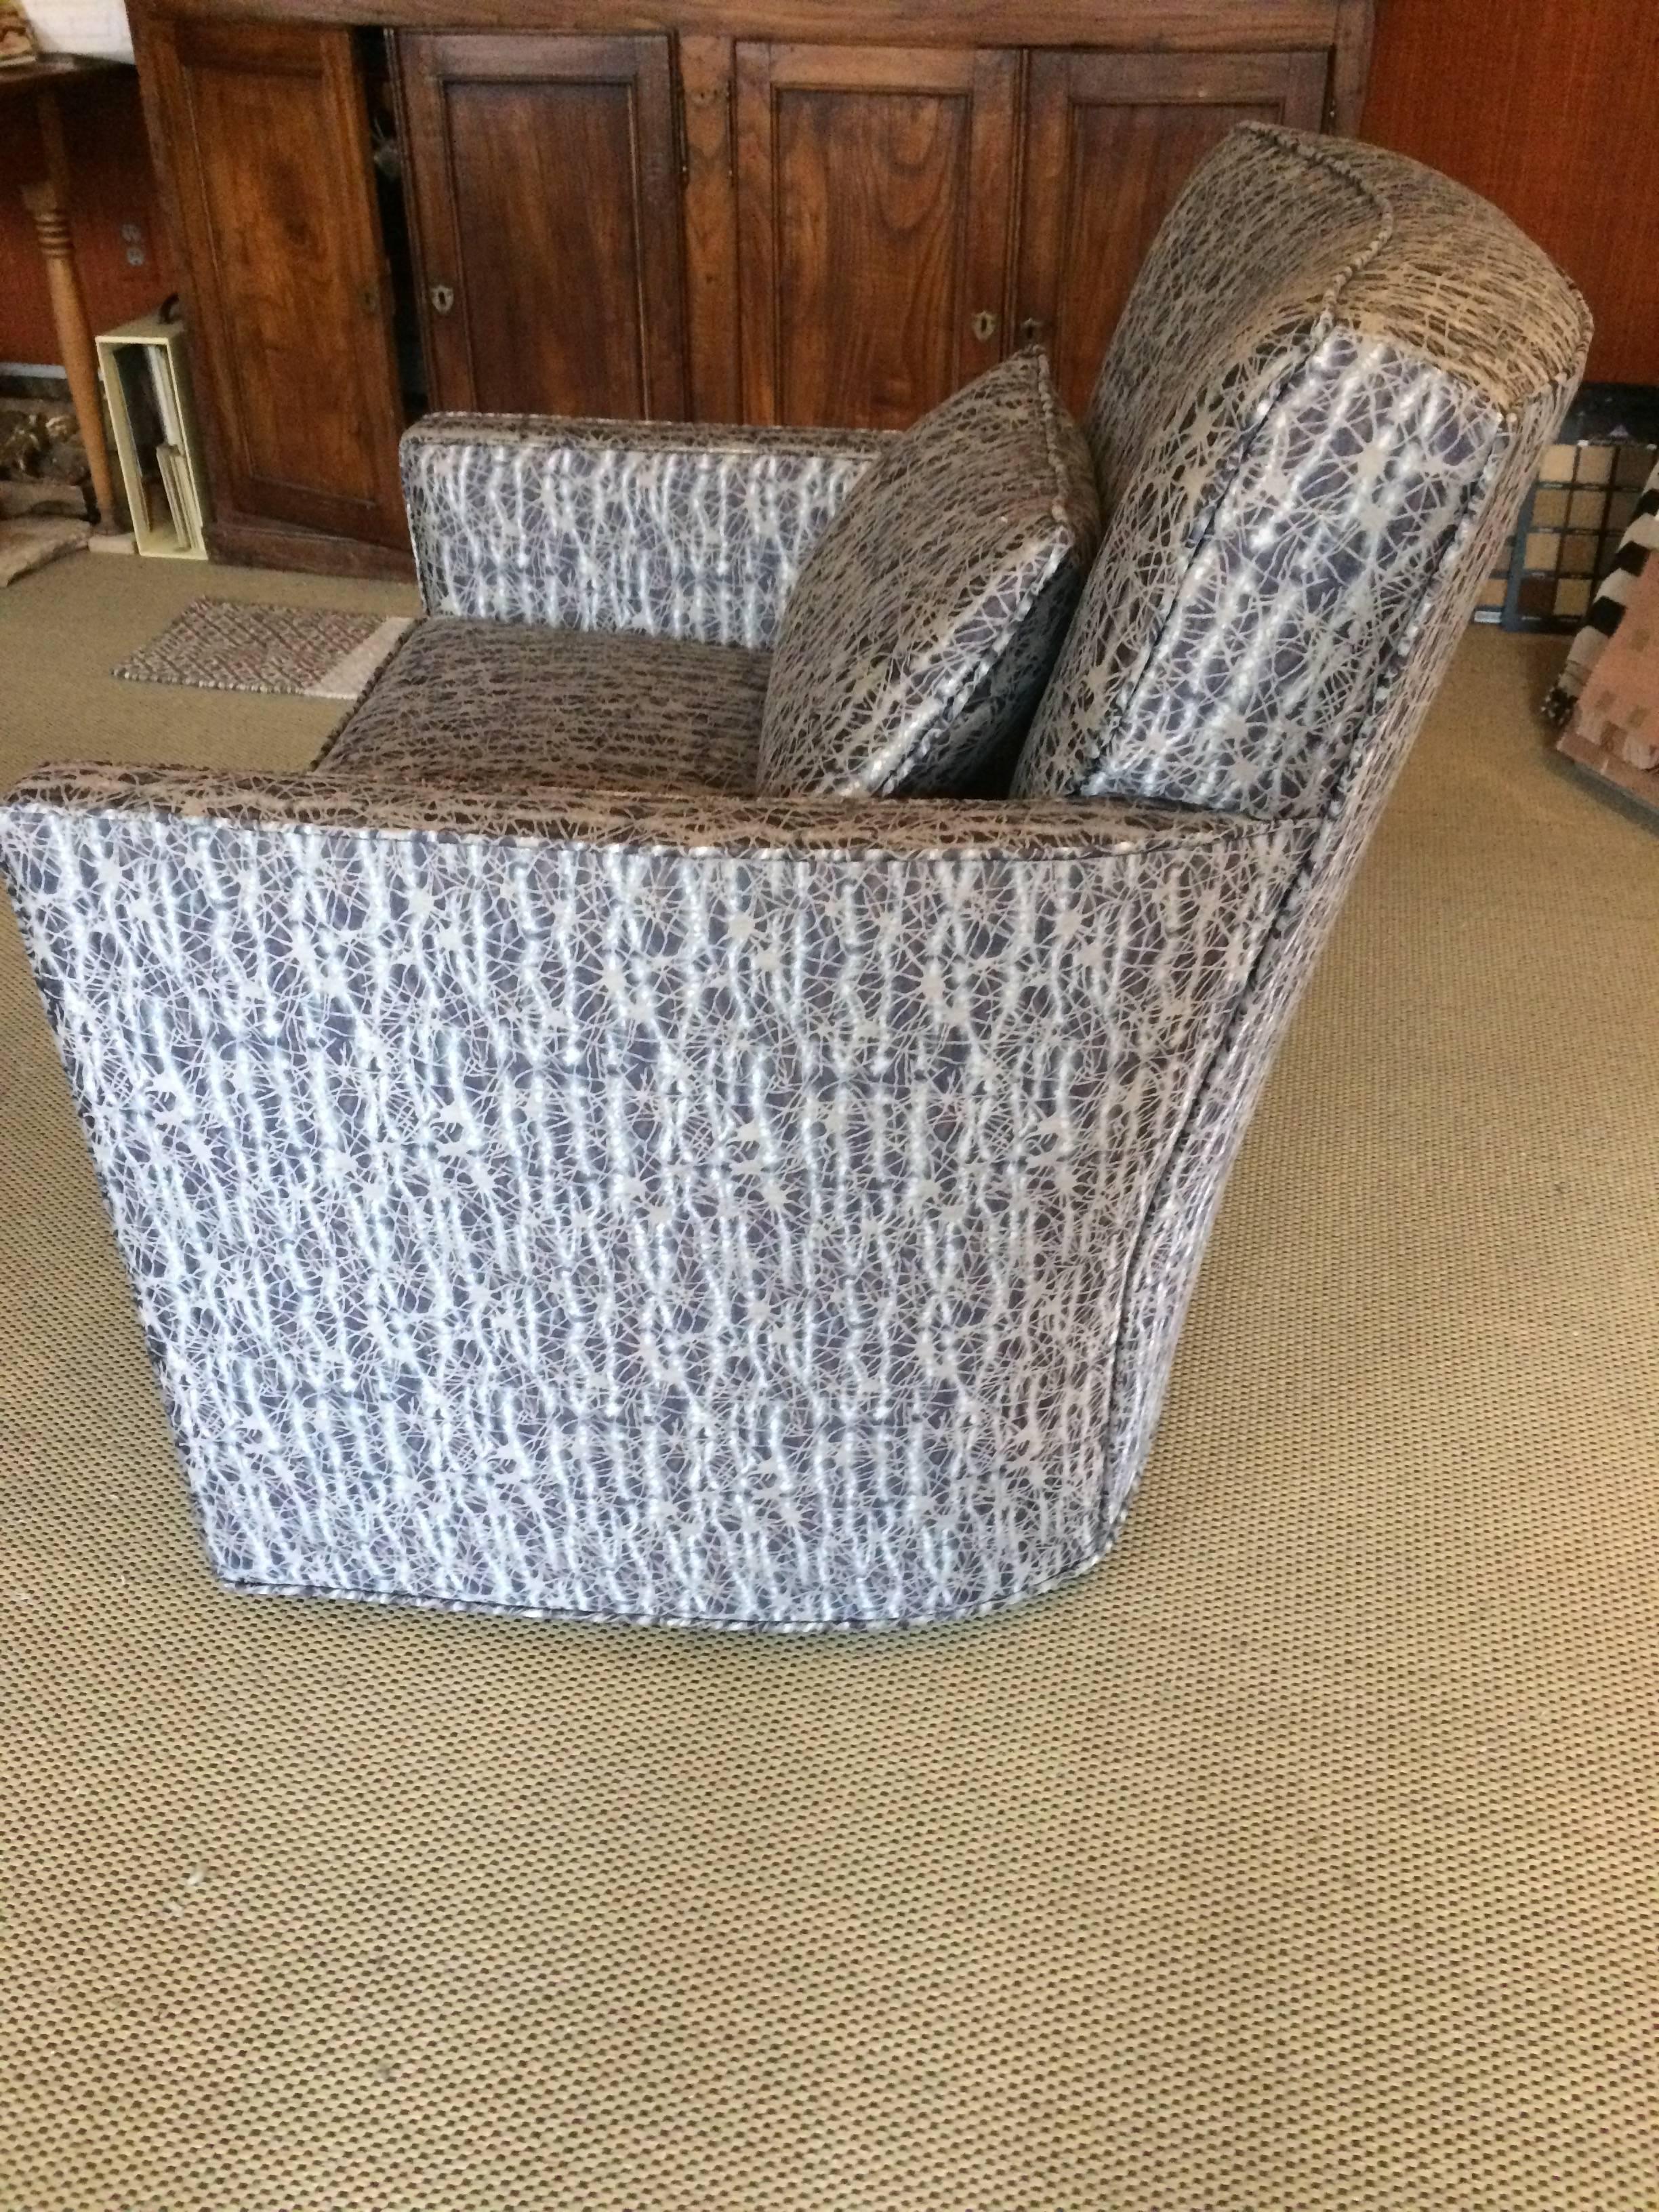 Great looking swivel club chair with Mid-Century modern lines, newly upholstered in Donghia fabric. Measure: Seat depth 20.5.